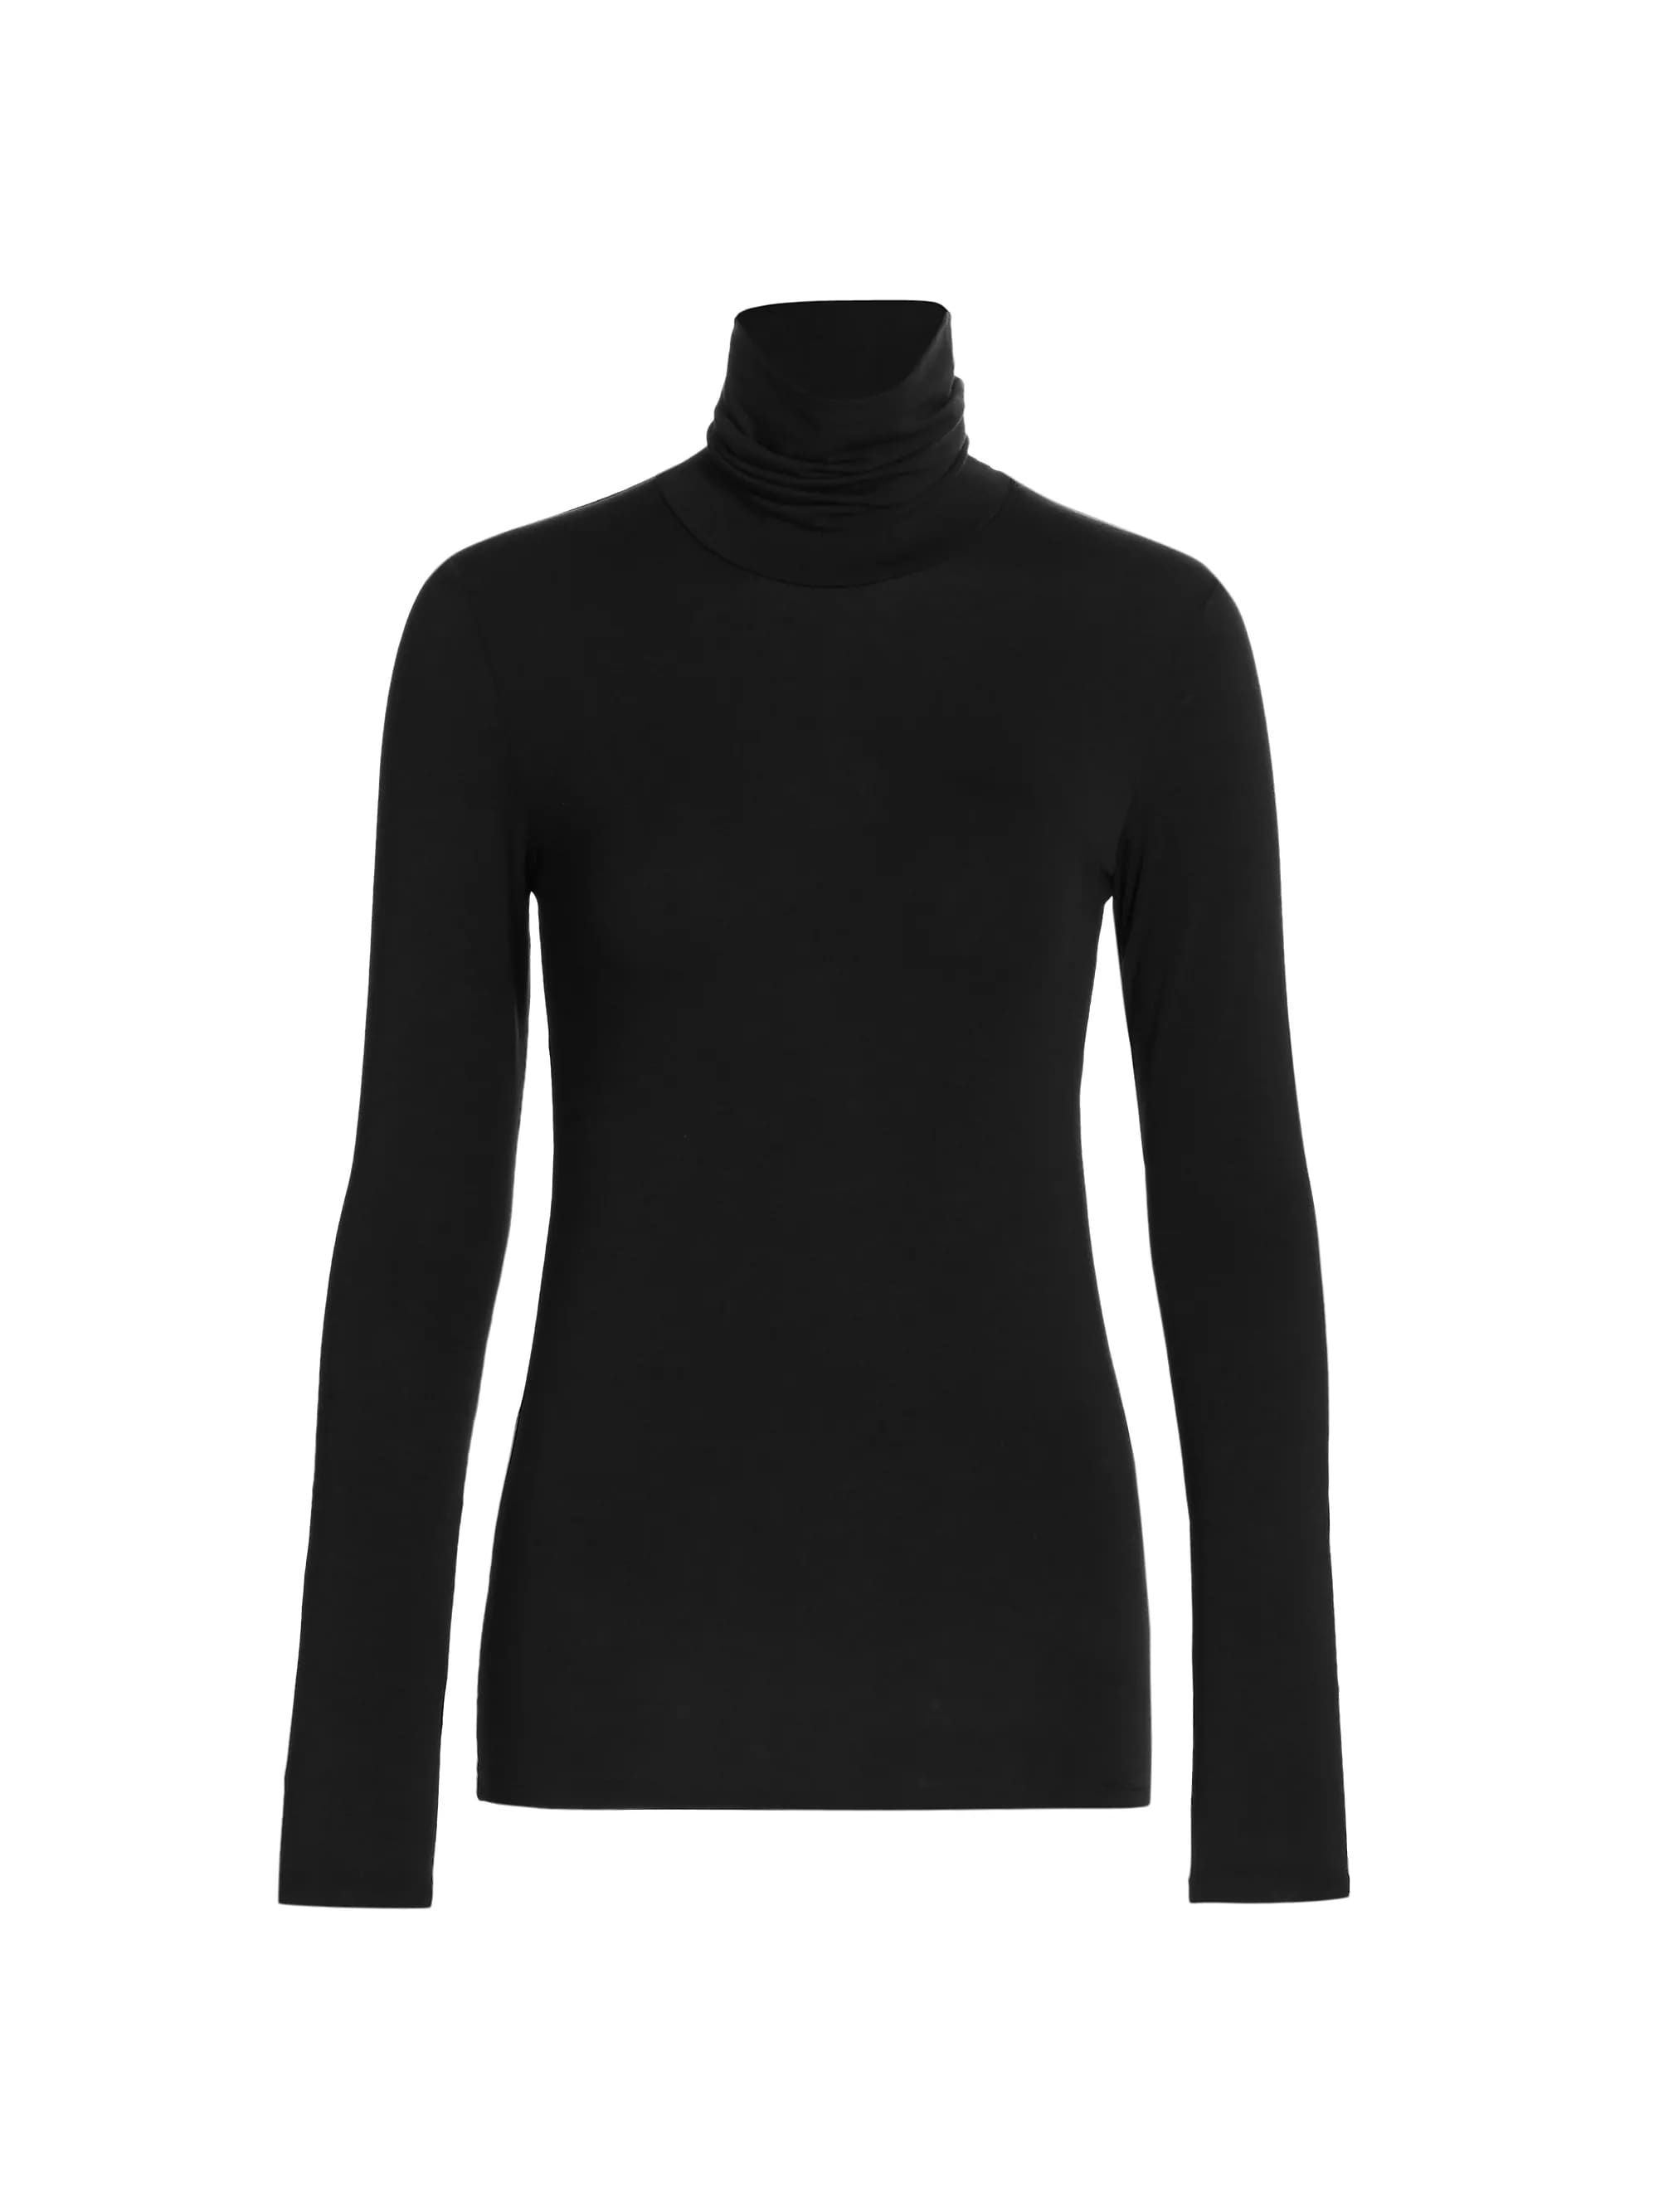 Soft Touch Turtleneck Top | Saks Fifth Avenue